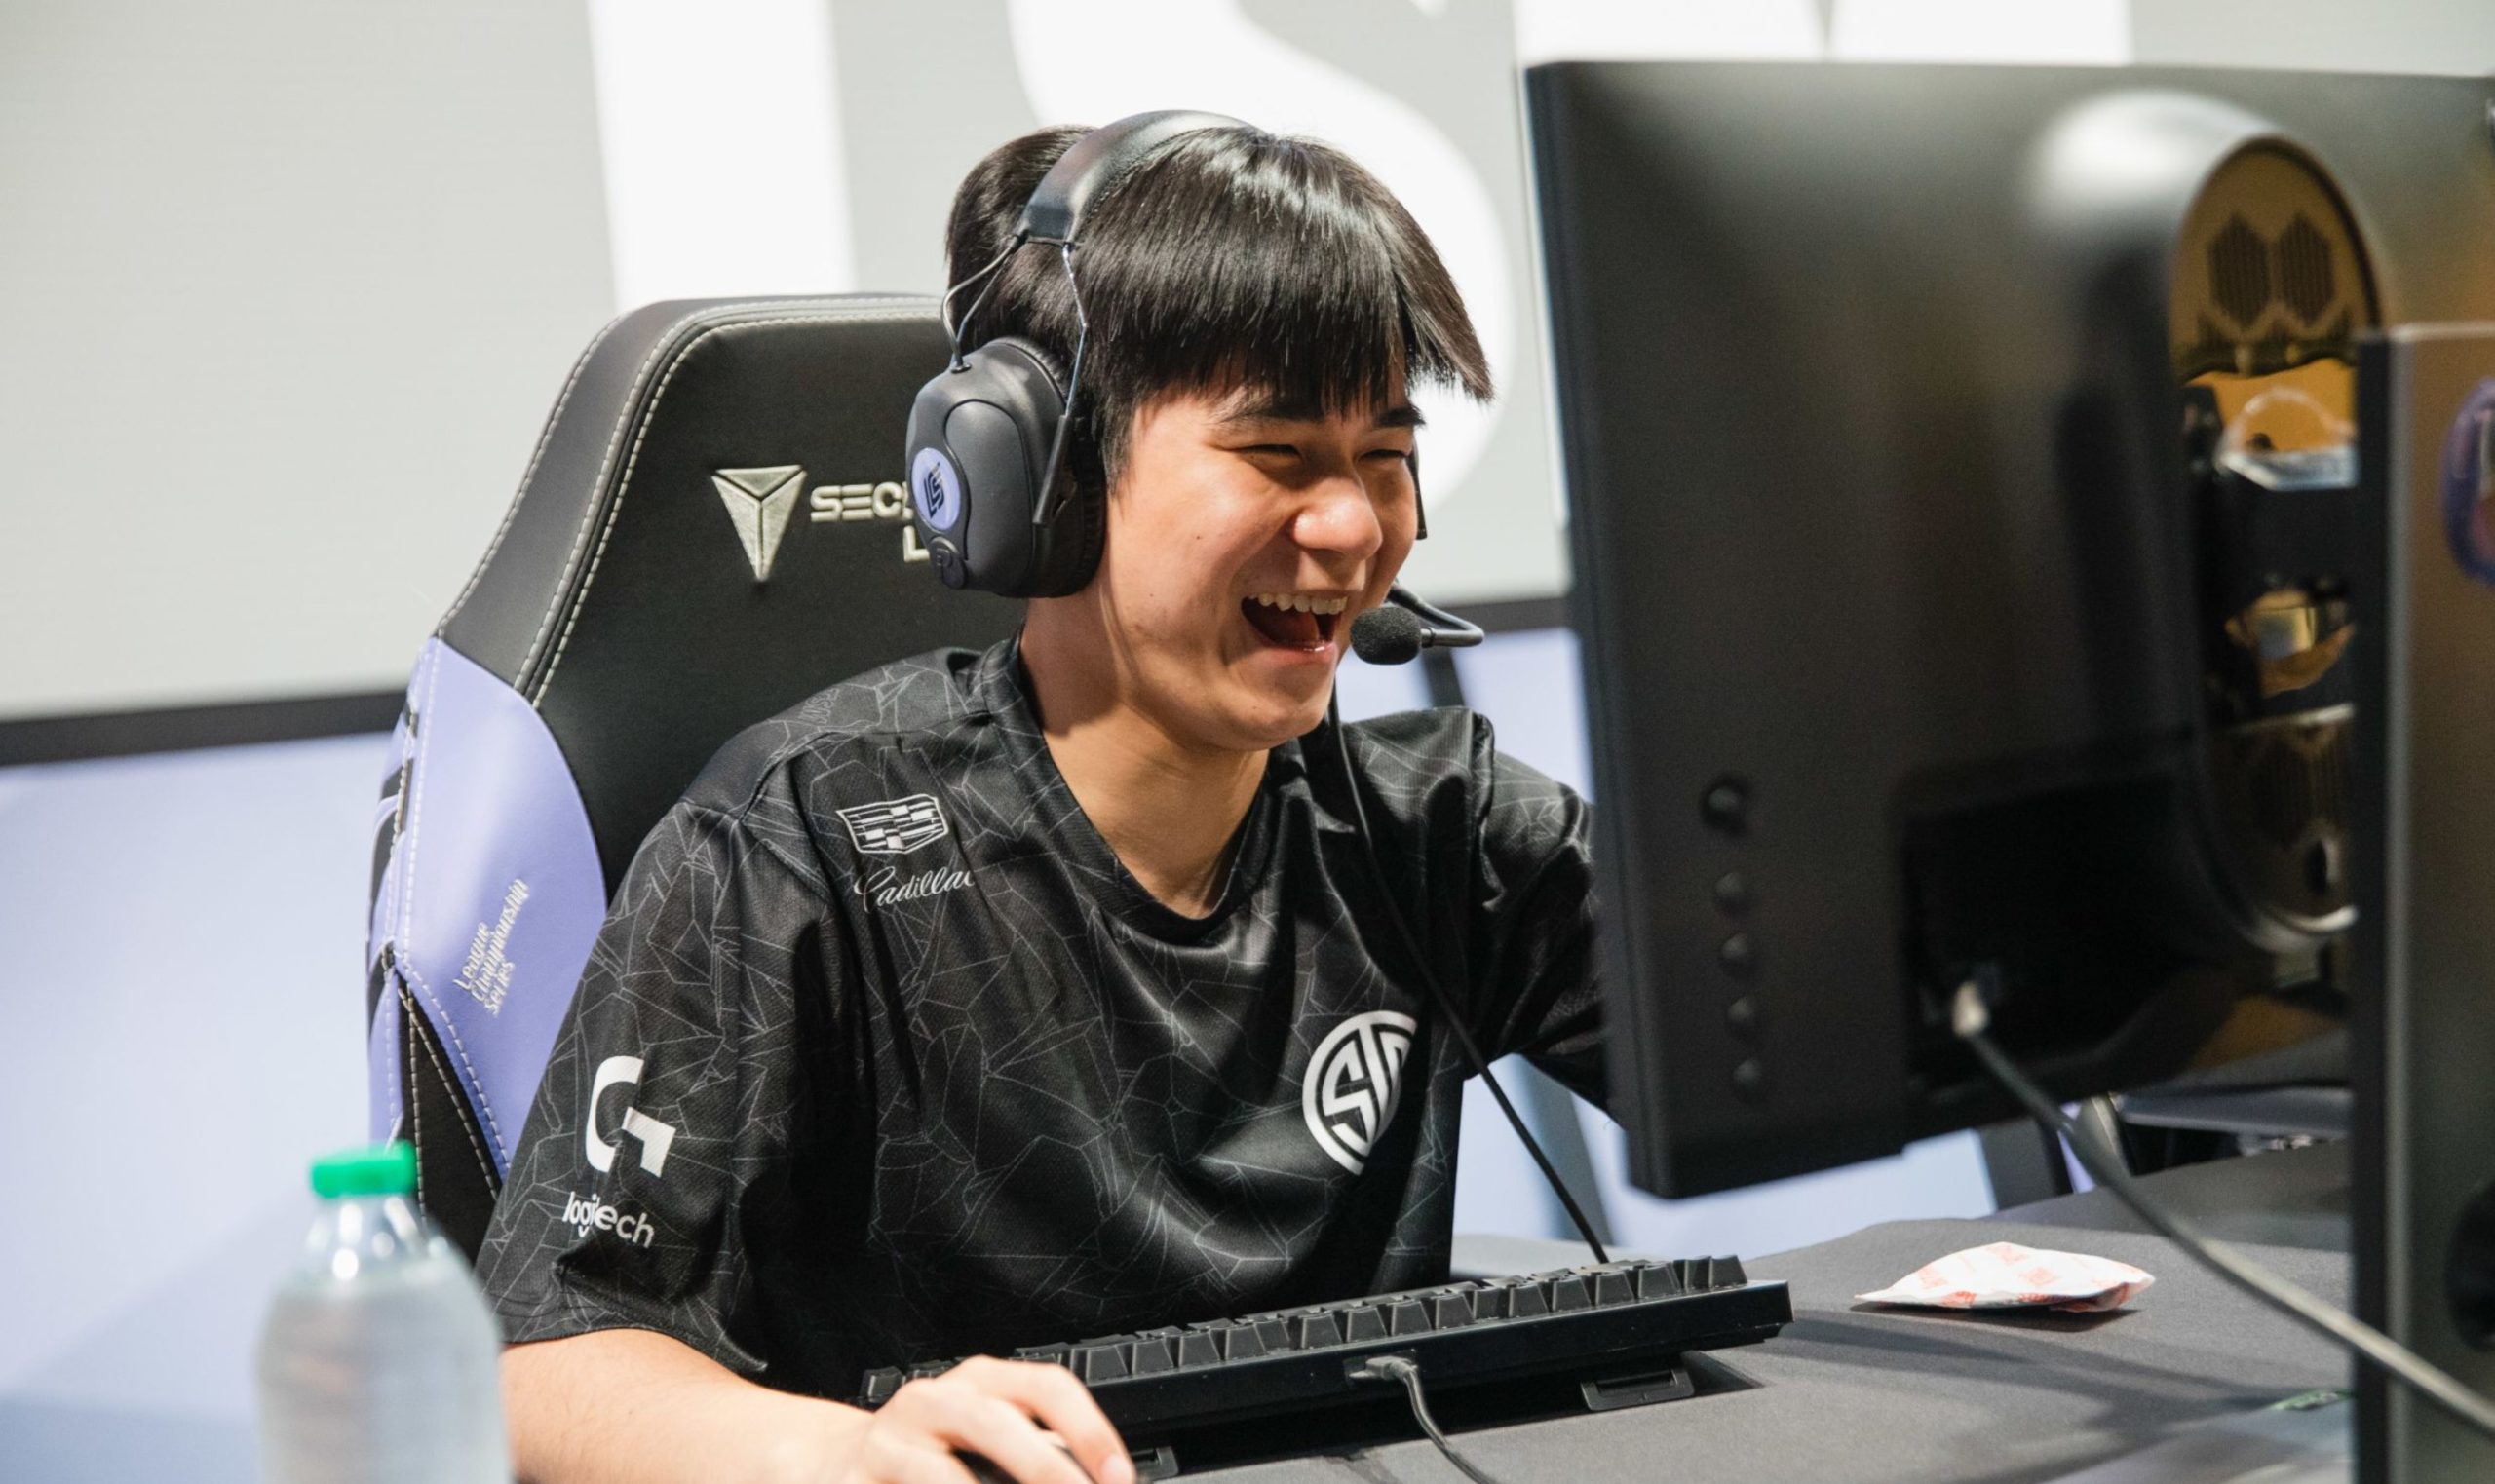 Spica on TSM future: 'I just wanna play as well as I can [and